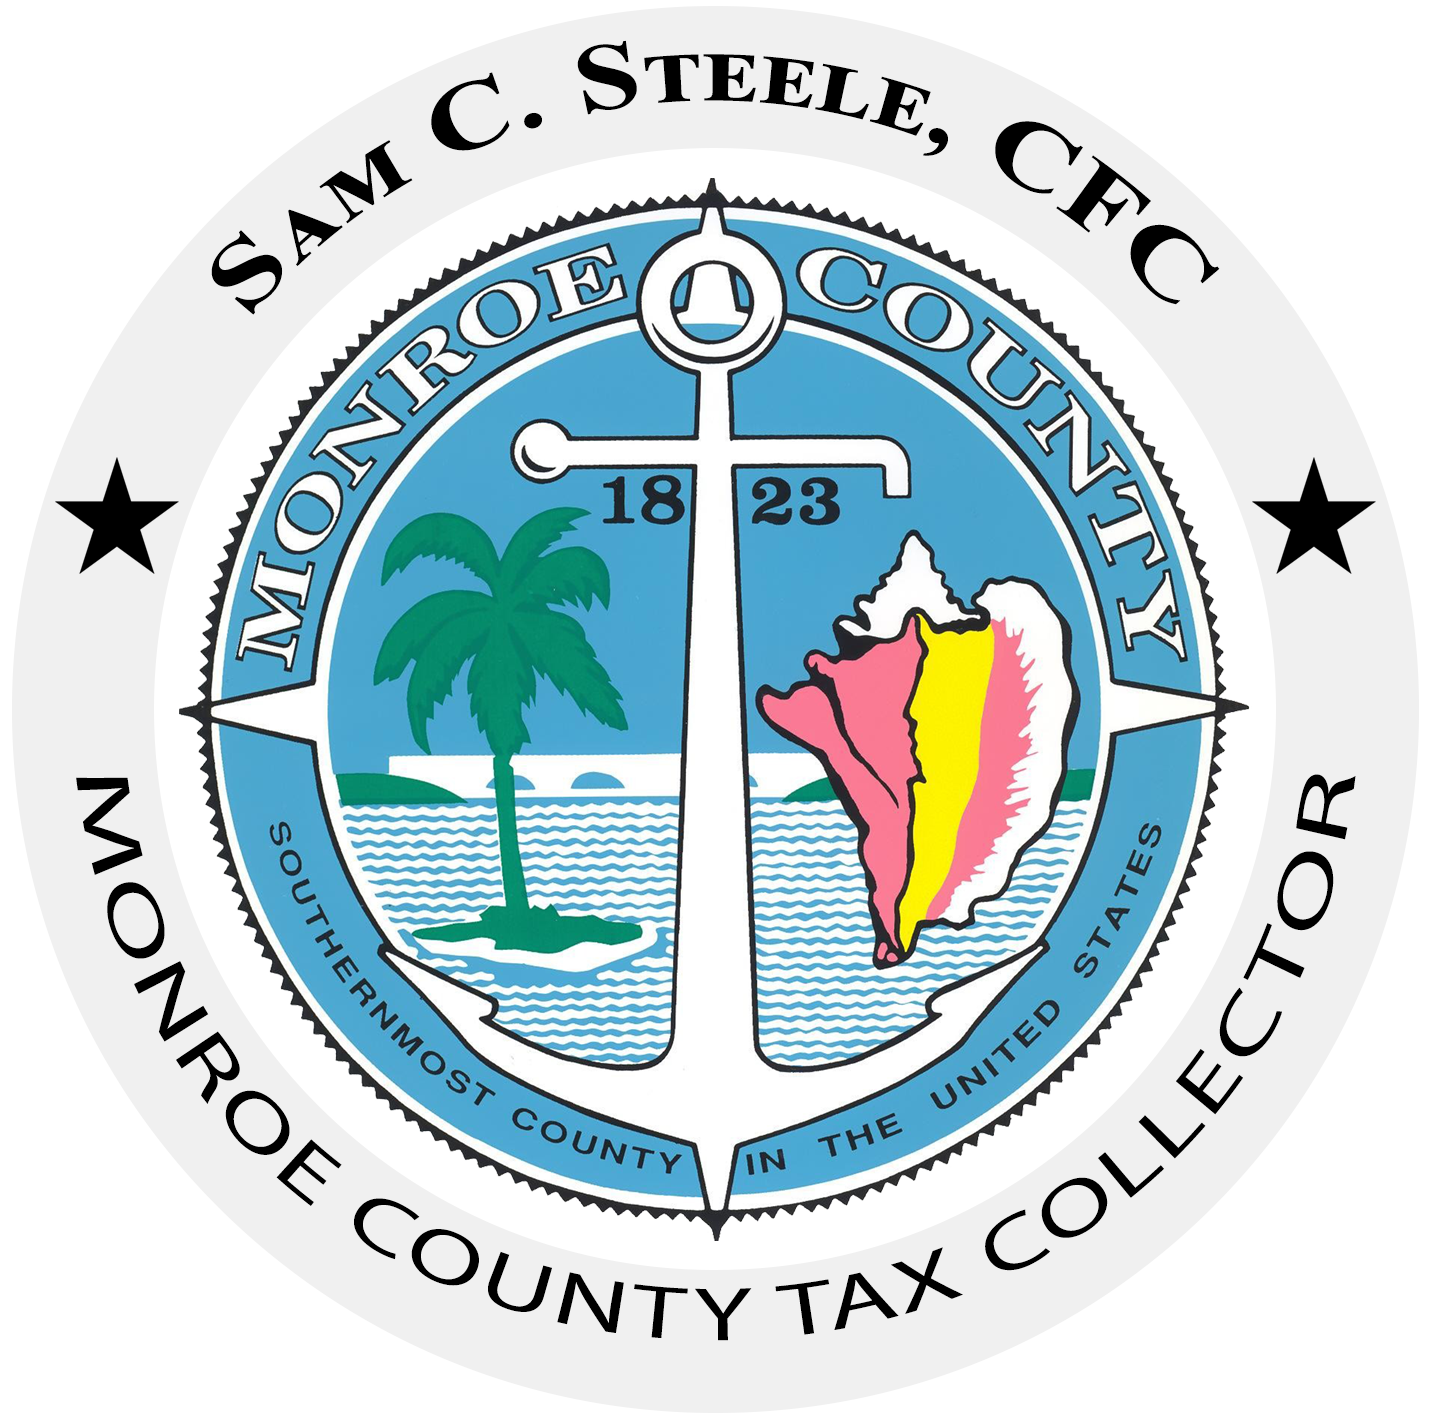 monroe township tax collector middlesex county